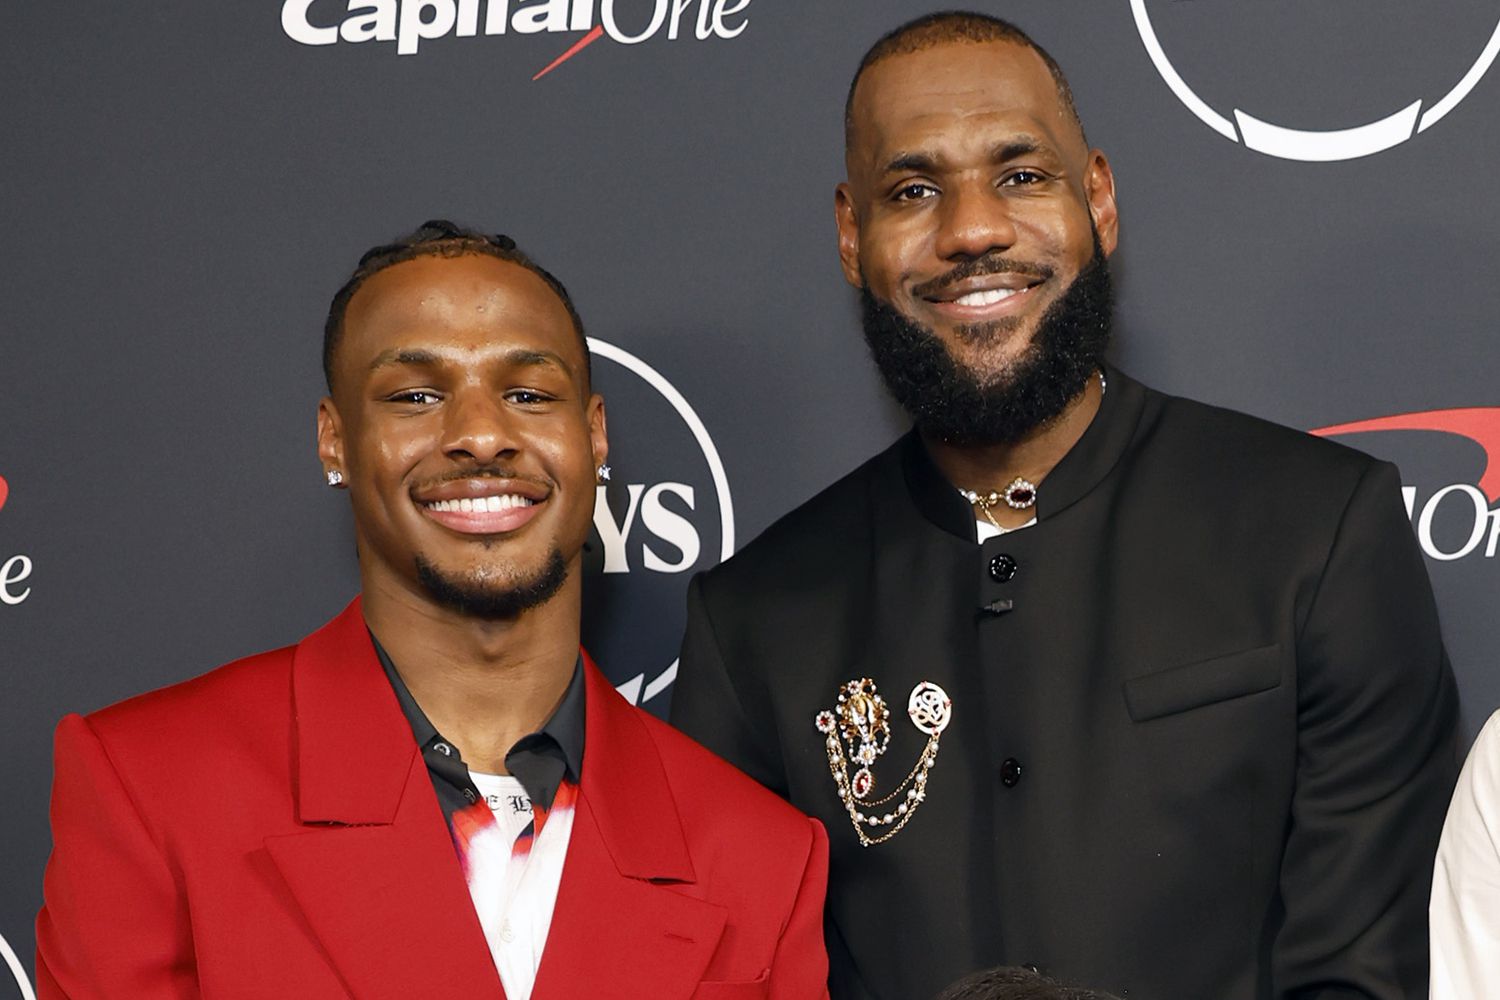 Bronny James ready for 'increased pressure' of playing with dad LeBron